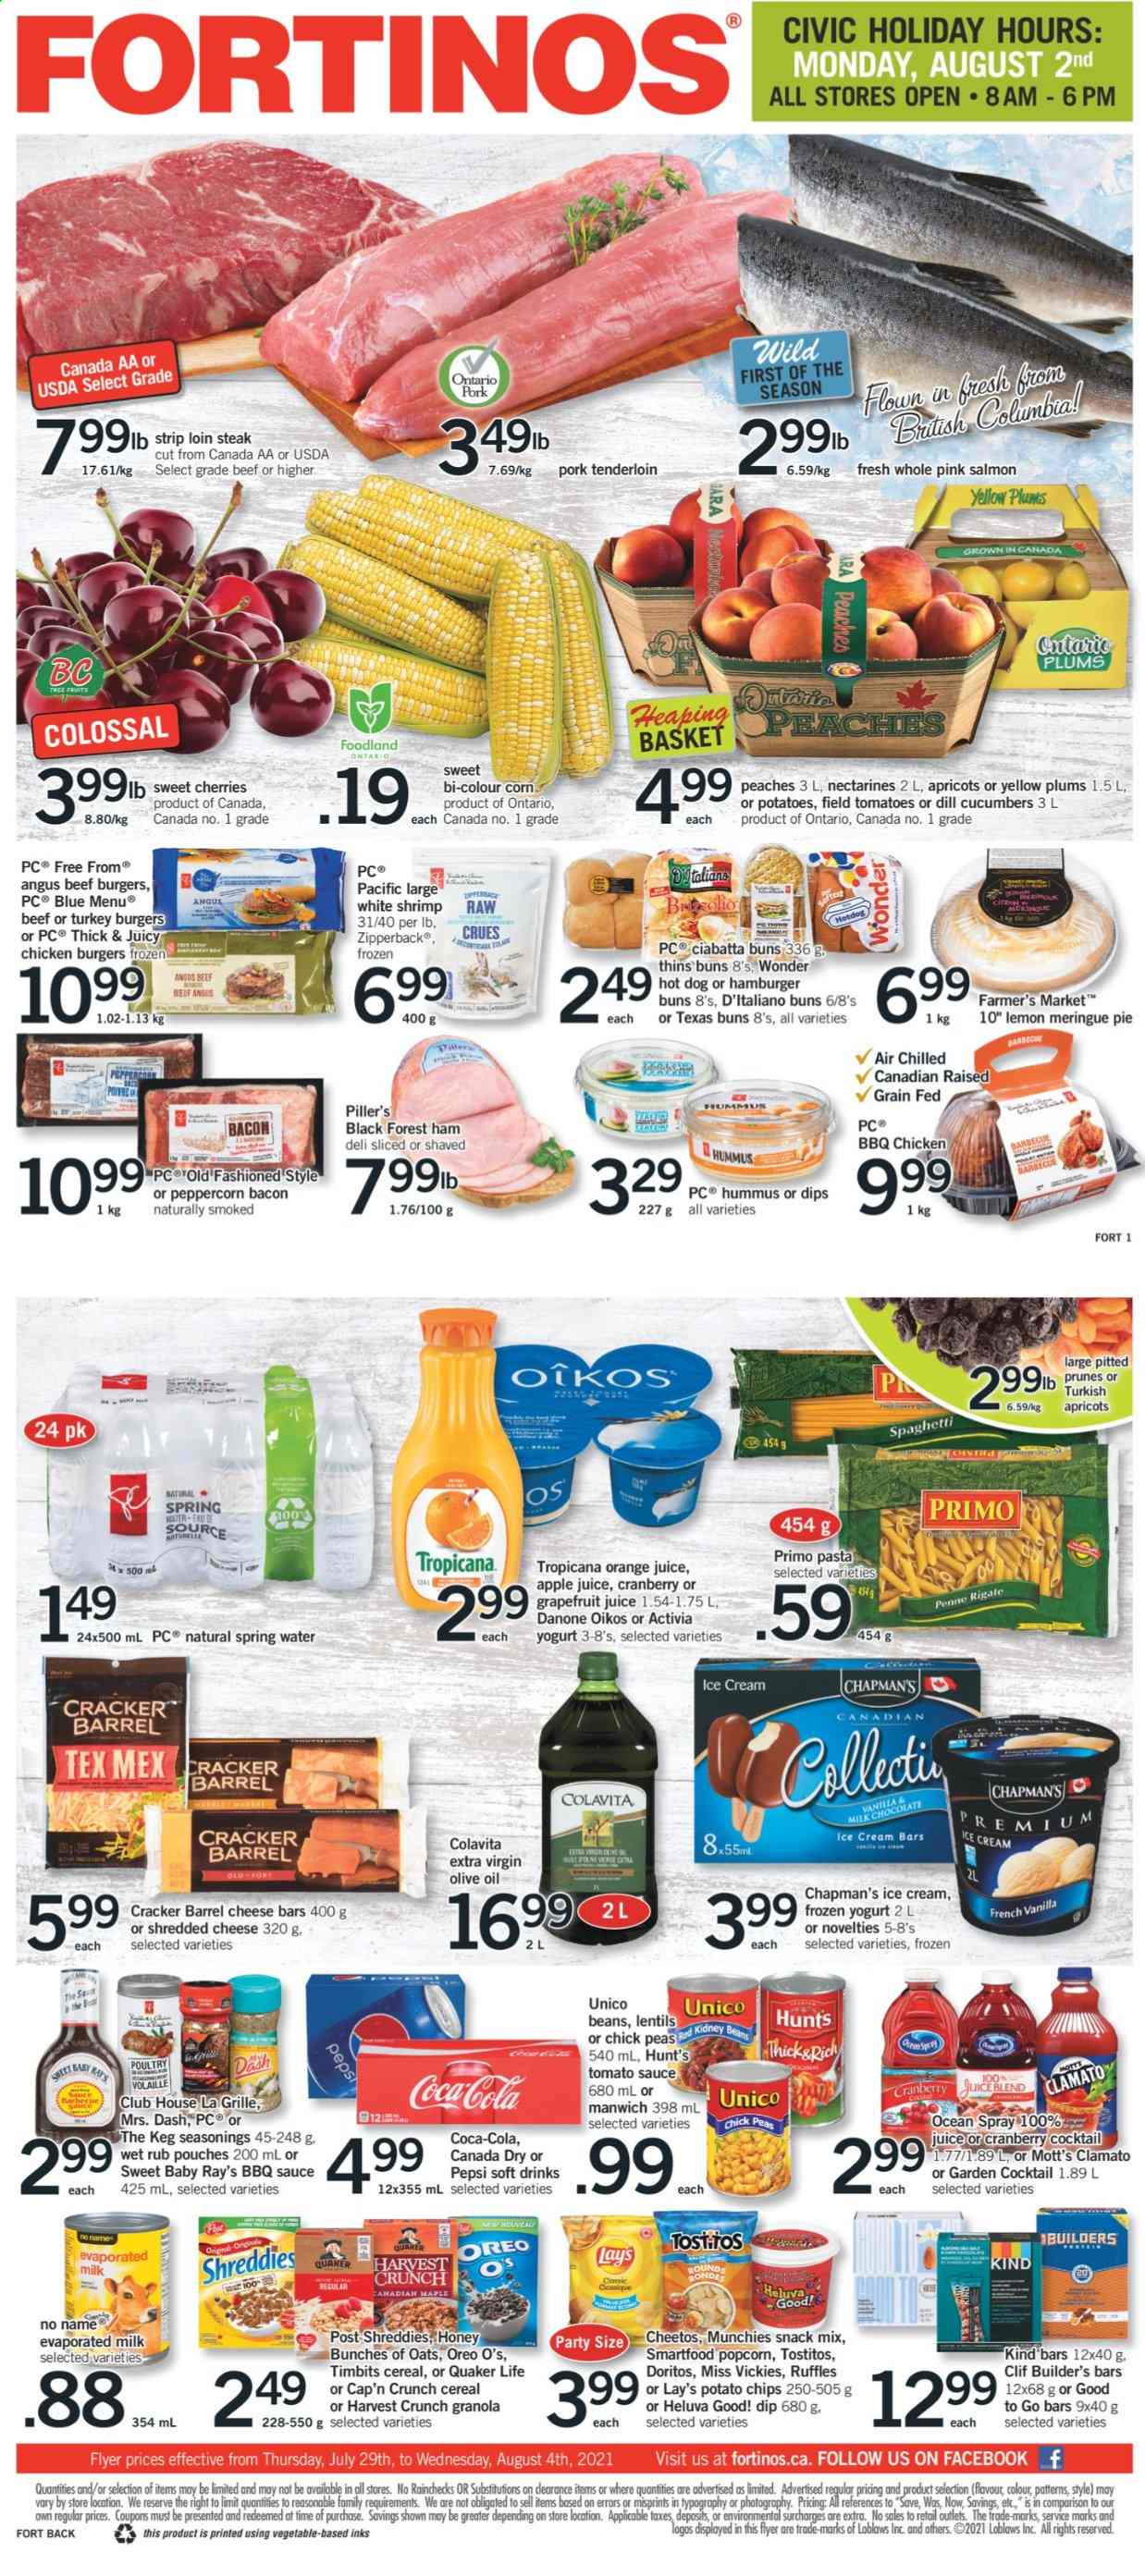 thumbnail - Fortinos Flyer - July 29, 2021 - August 04, 2021 - Sales products - hot dog rolls, pie, buns, burger buns, corn, cucumber, peas, nectarines, plums, apricots, peaches, Mott's, salmon, shrimps, No Name, spaghetti, hot dog, pasta, sauce, Quaker, beef burger, bacon, ham, hummus, shredded cheese, Oreo, yoghurt, Activia, Oikos, evaporated milk, dip, ice cream, ice cream bars, snack, crackers, Doritos, potato chips, Cheetos, Lay’s, Smartfood, Thins, popcorn, Ruffles, Tostitos, lentils, tomato sauce, Manwich, cereals, Cap'n Crunch, penne, dill, BBQ sauce, extra virgin olive oil, olive oil, oil, prunes, dried fruit, apple juice, Canada Dry, Coca-Cola, Pepsi, orange juice, juice, Clamato, soft drink, spring water, beef meat, turkey burger, pork meat, pork tenderloin, Danone, granola, steak. Page 1.